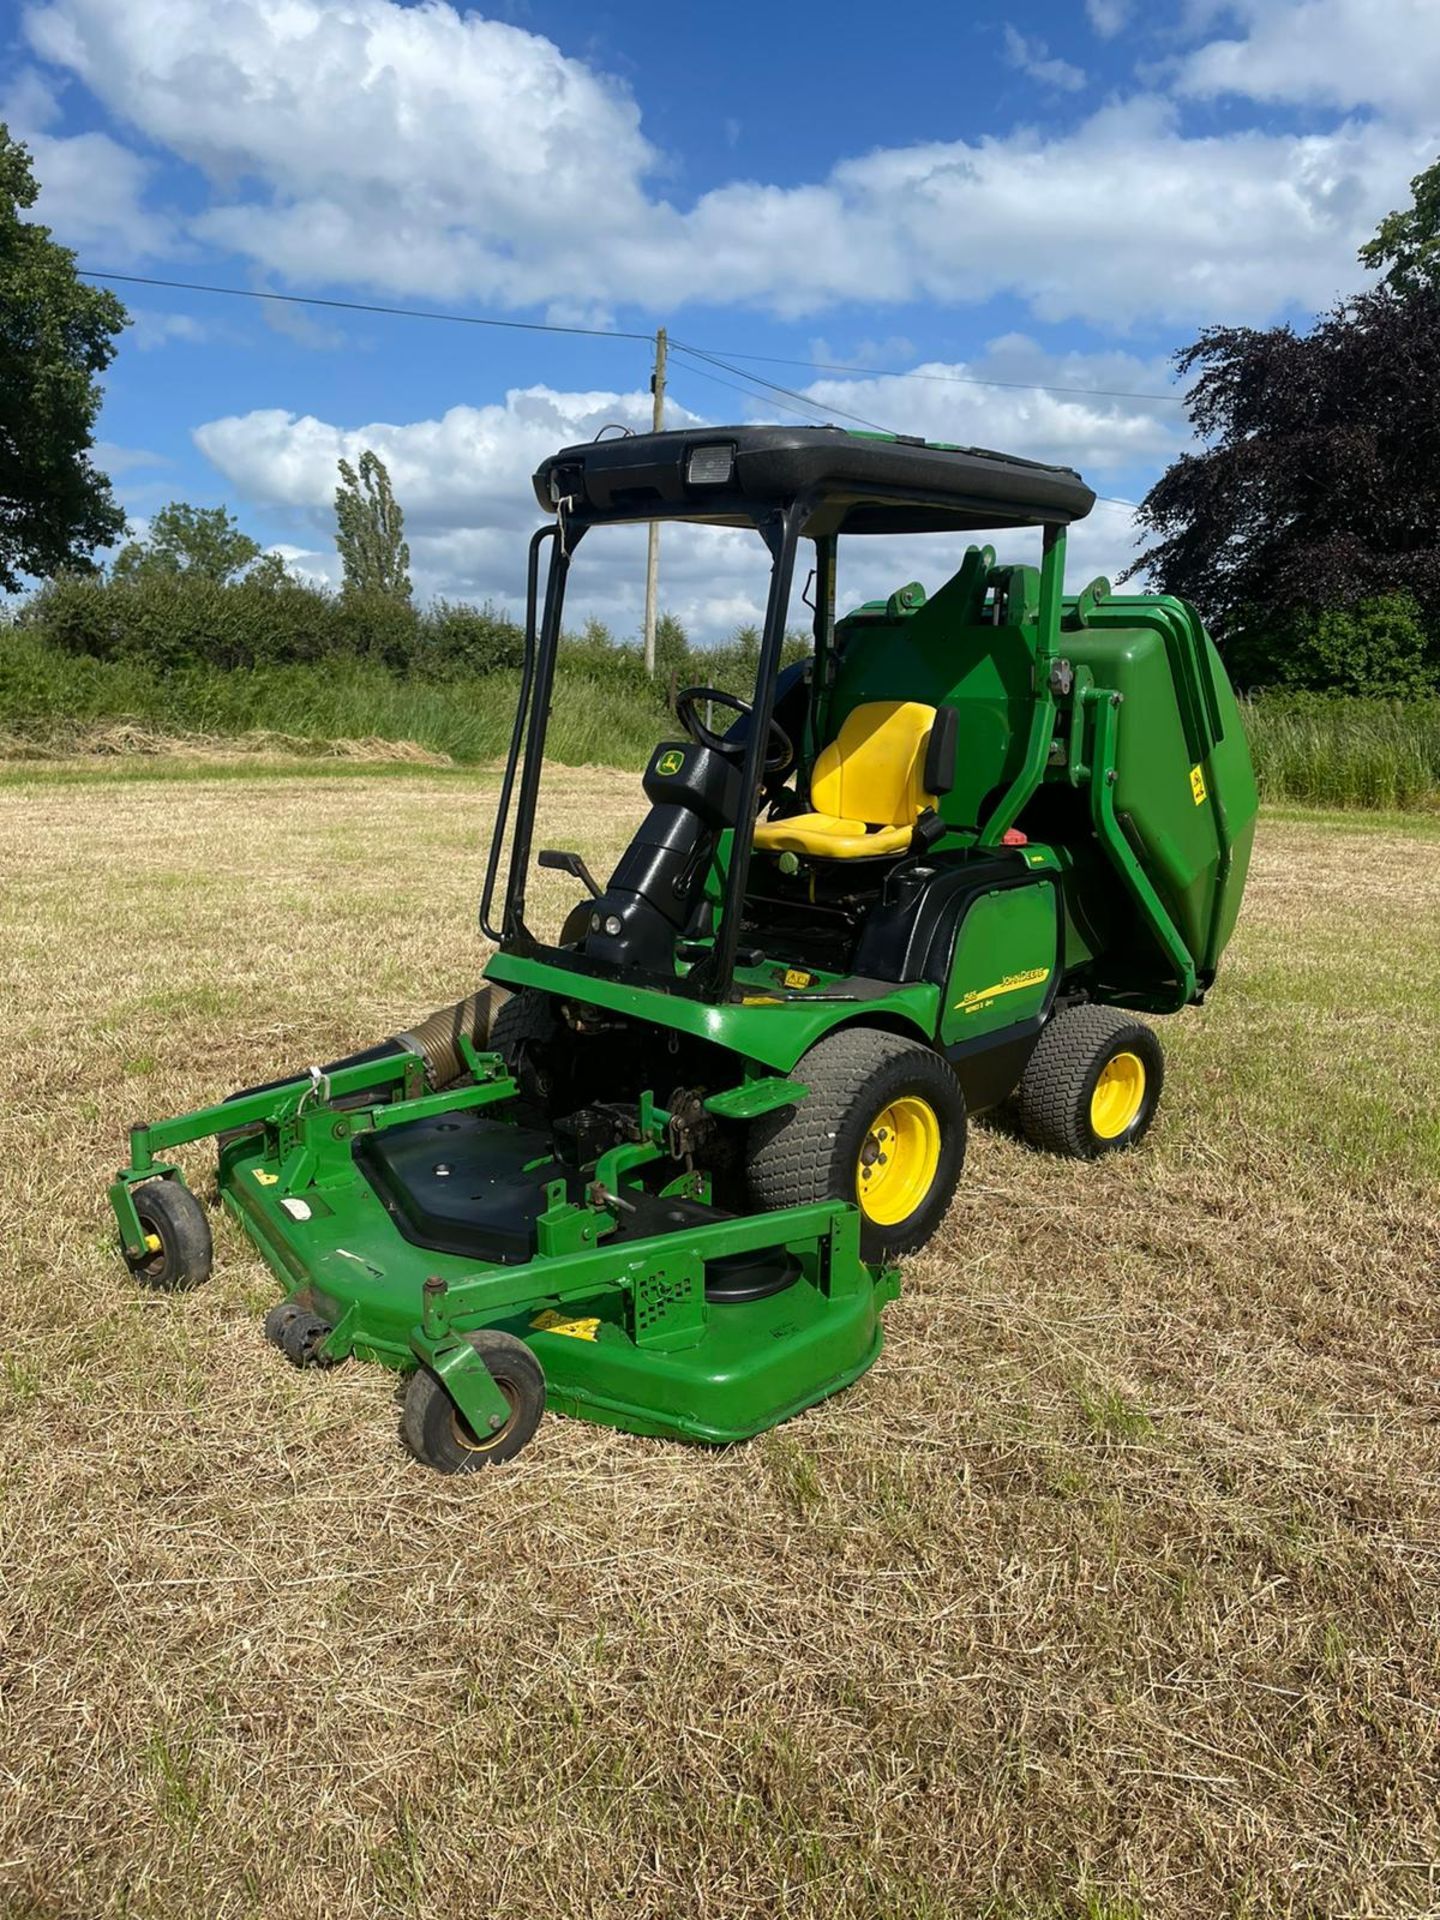 JOHN DEERE 1565 SERIES 2 RIDE ON LAWN MOWER WITH CLAMSHELL COLLECTOR *NO VAT*